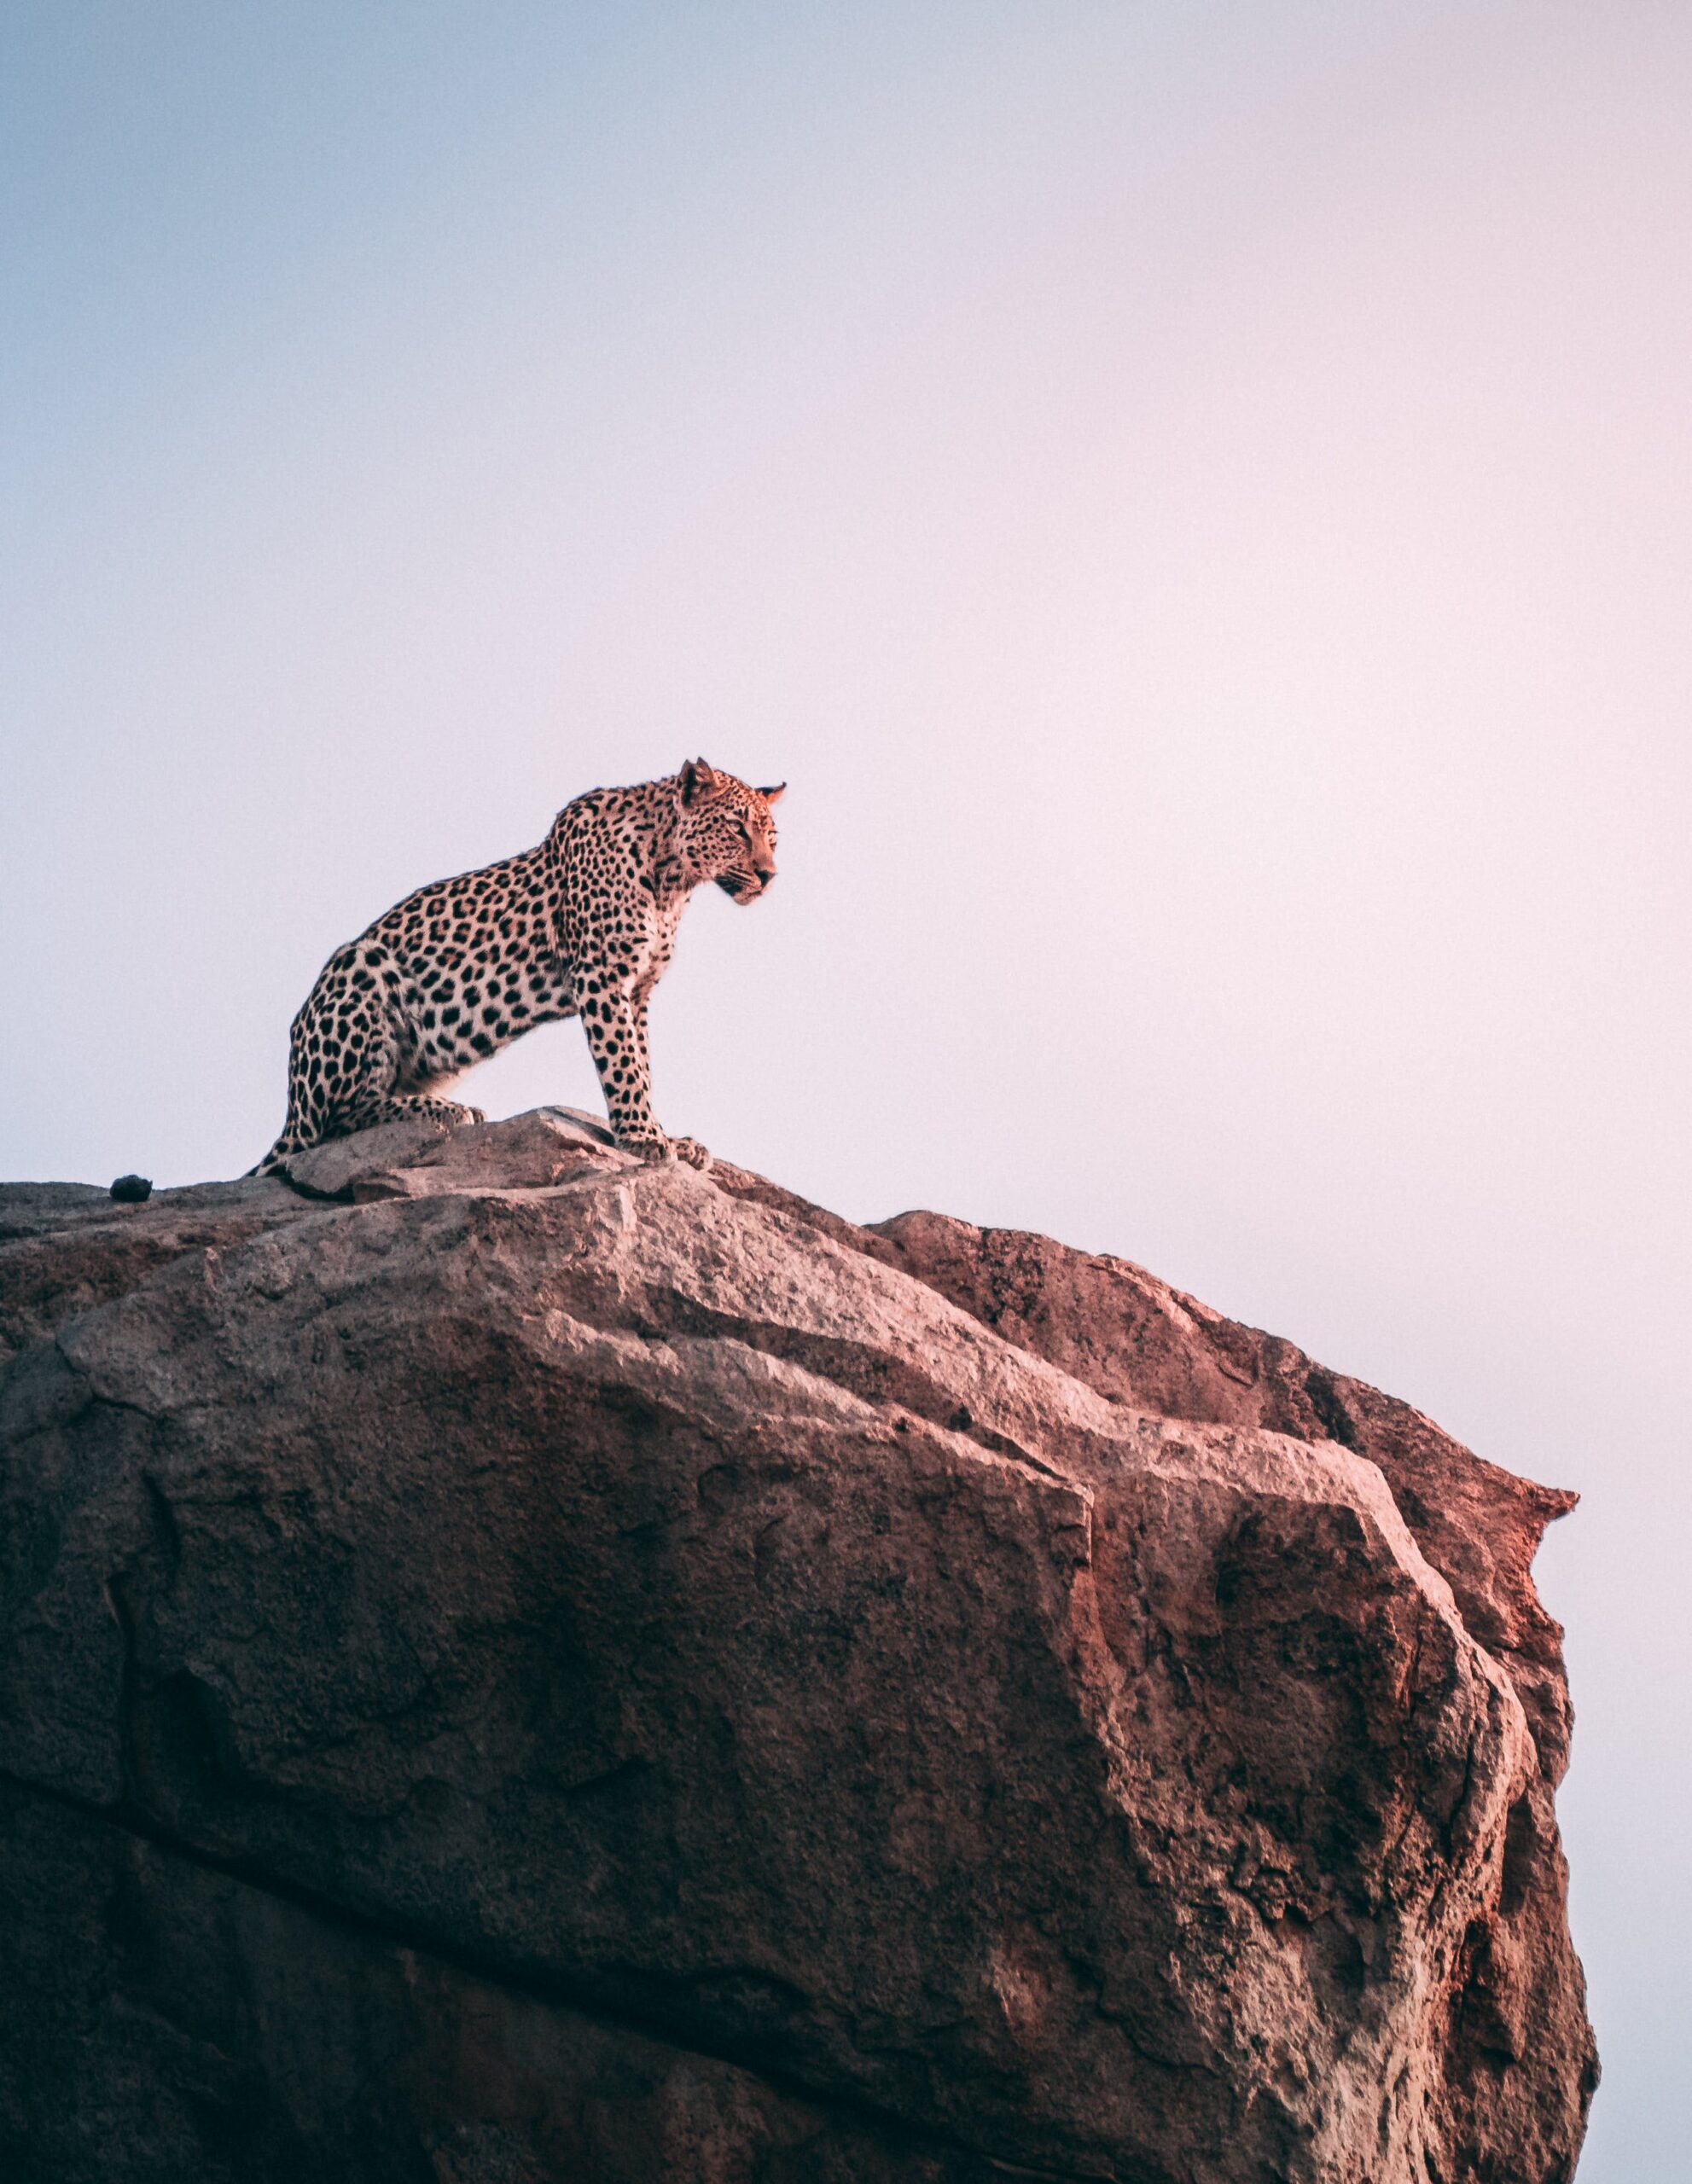 An alert leopard representing adaptability and agility found in changemaking.